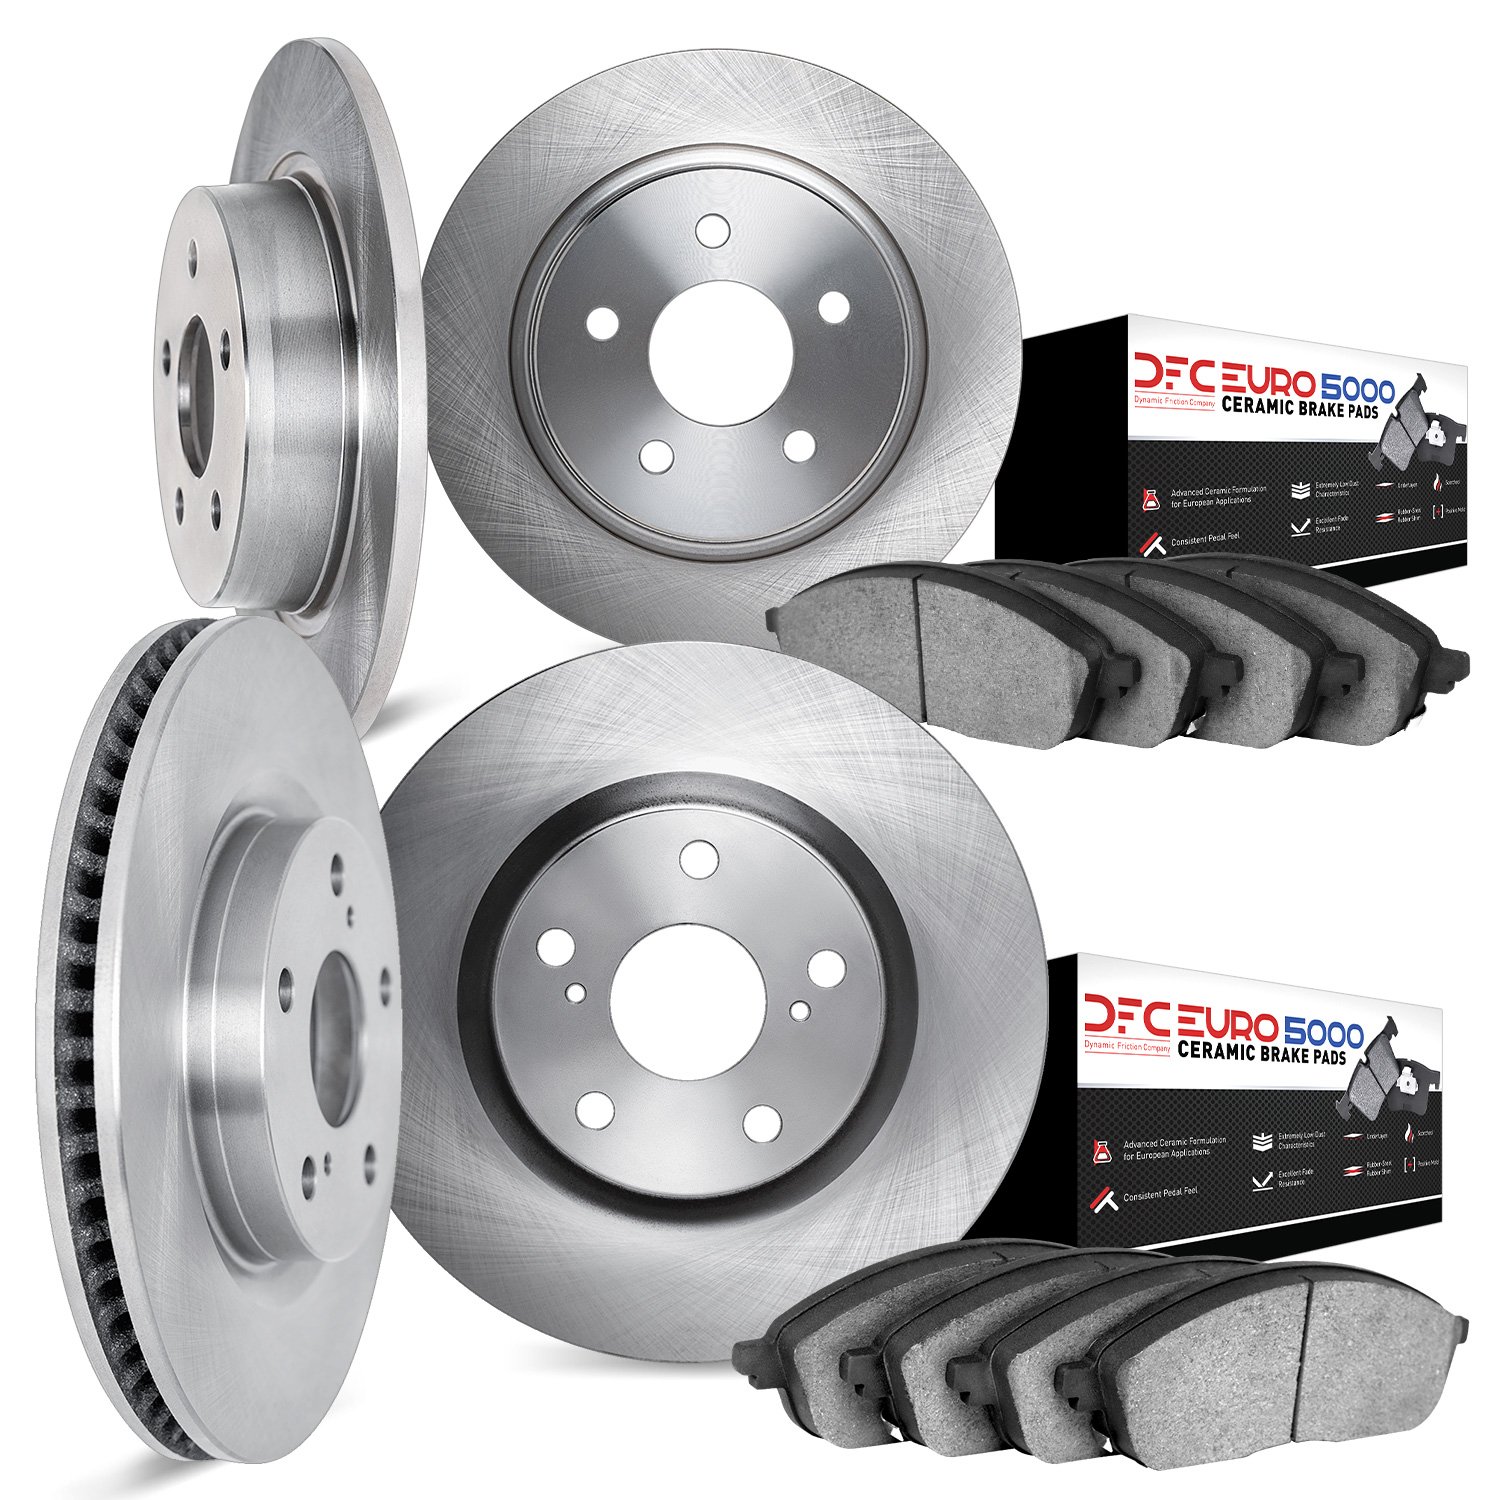 6604-11318 Brake Rotors w/5000 Euro Ceramic Brake Pads, 2008-2009 GM, Position: Front and Rear